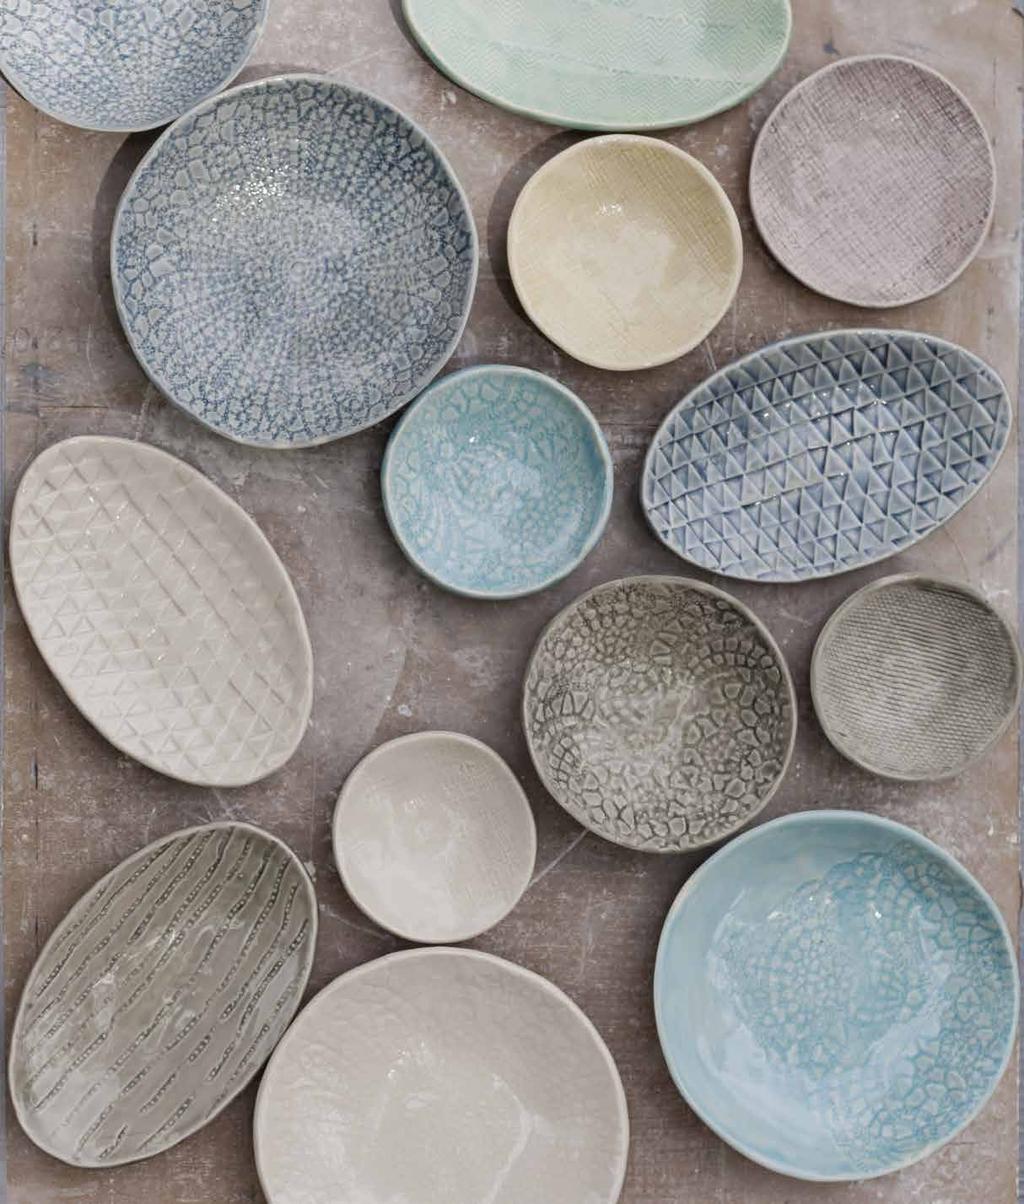 It is a great way to make the surface of stoneware and earthenware a bright white for applying brighter colors in layers over the slip. Slip cannot be applied after bisque.